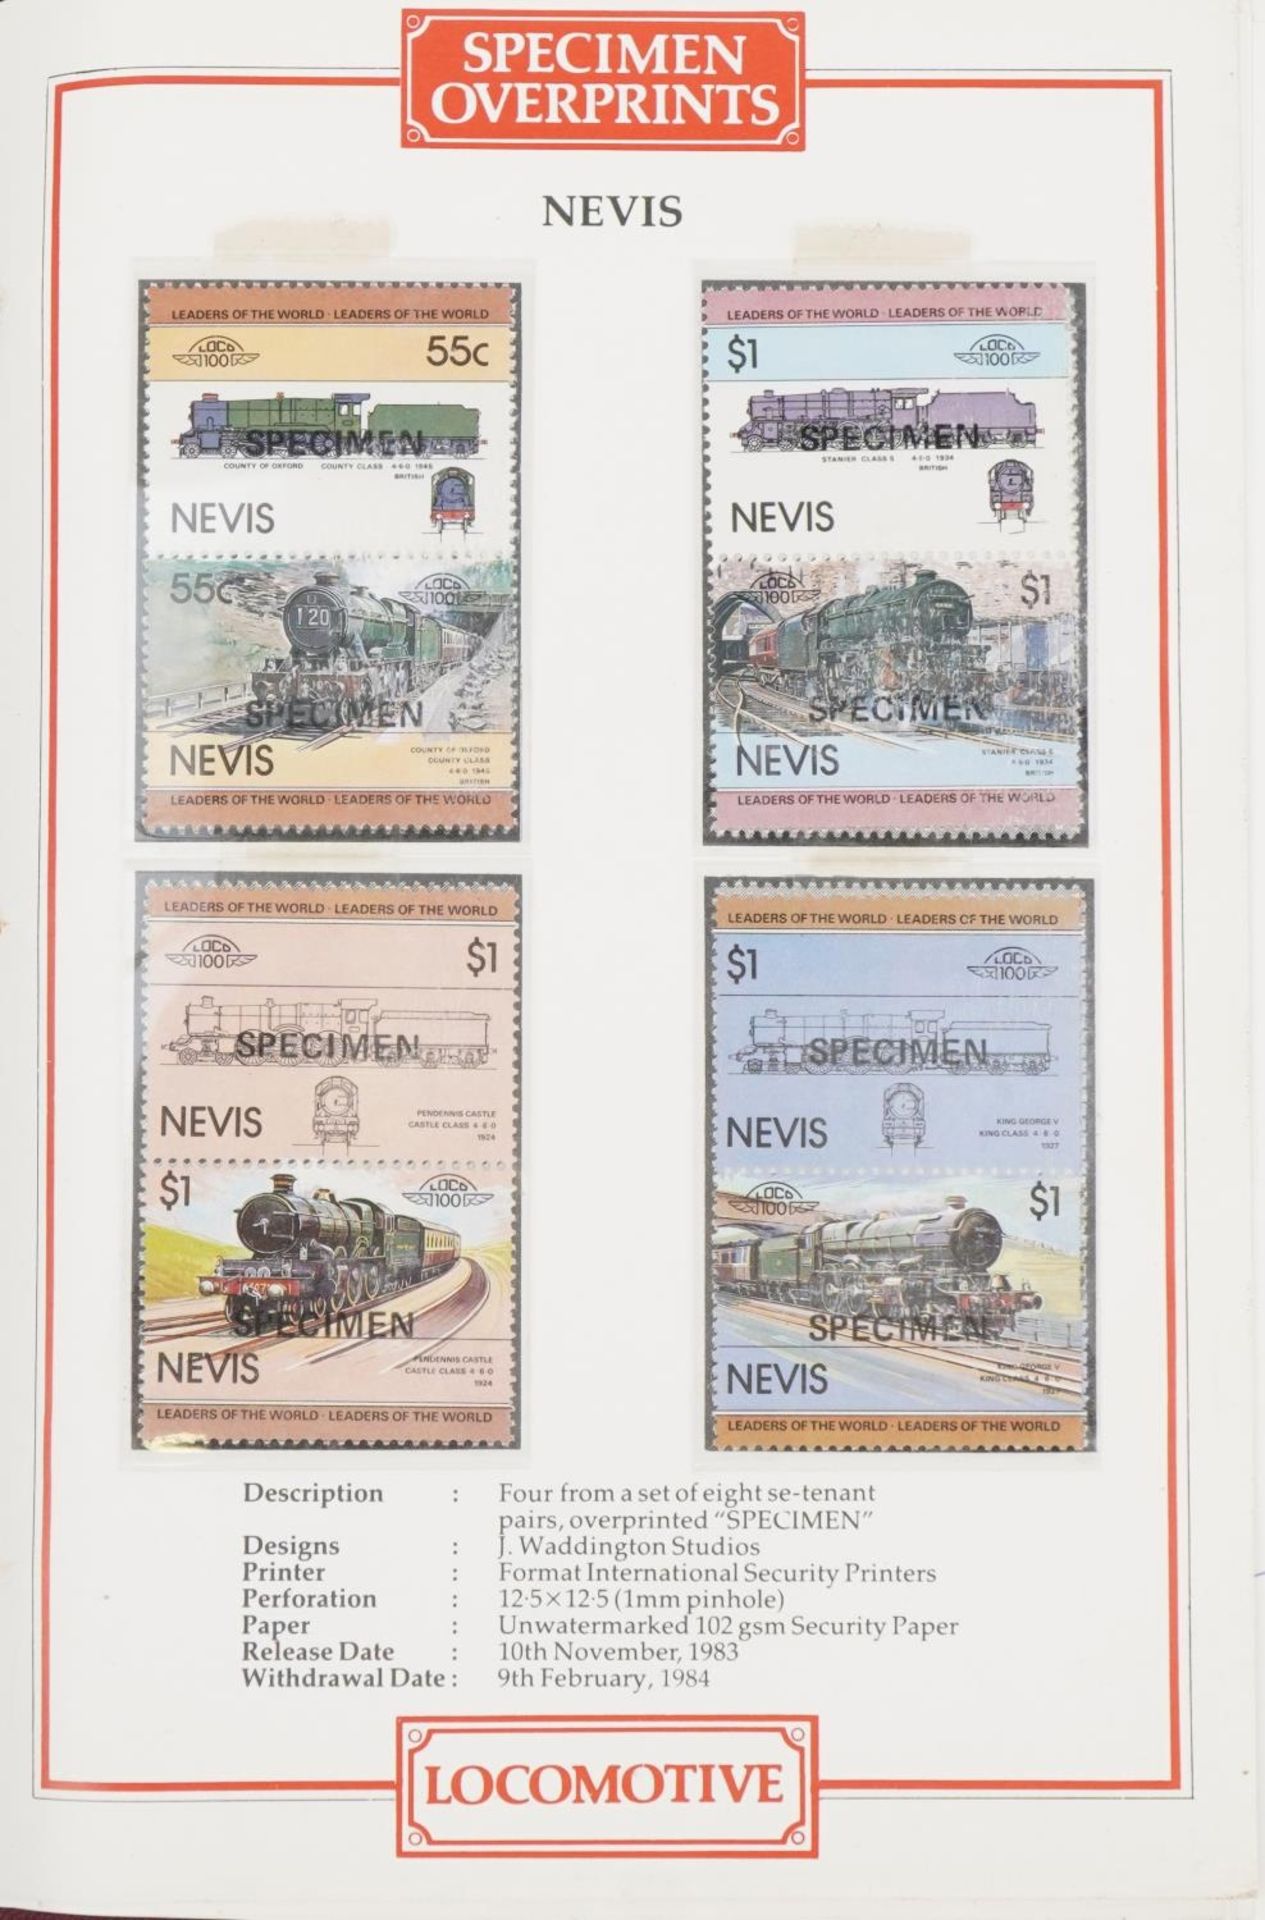 Collection of railway specimen stamps arranged in an album : For further information on this lot